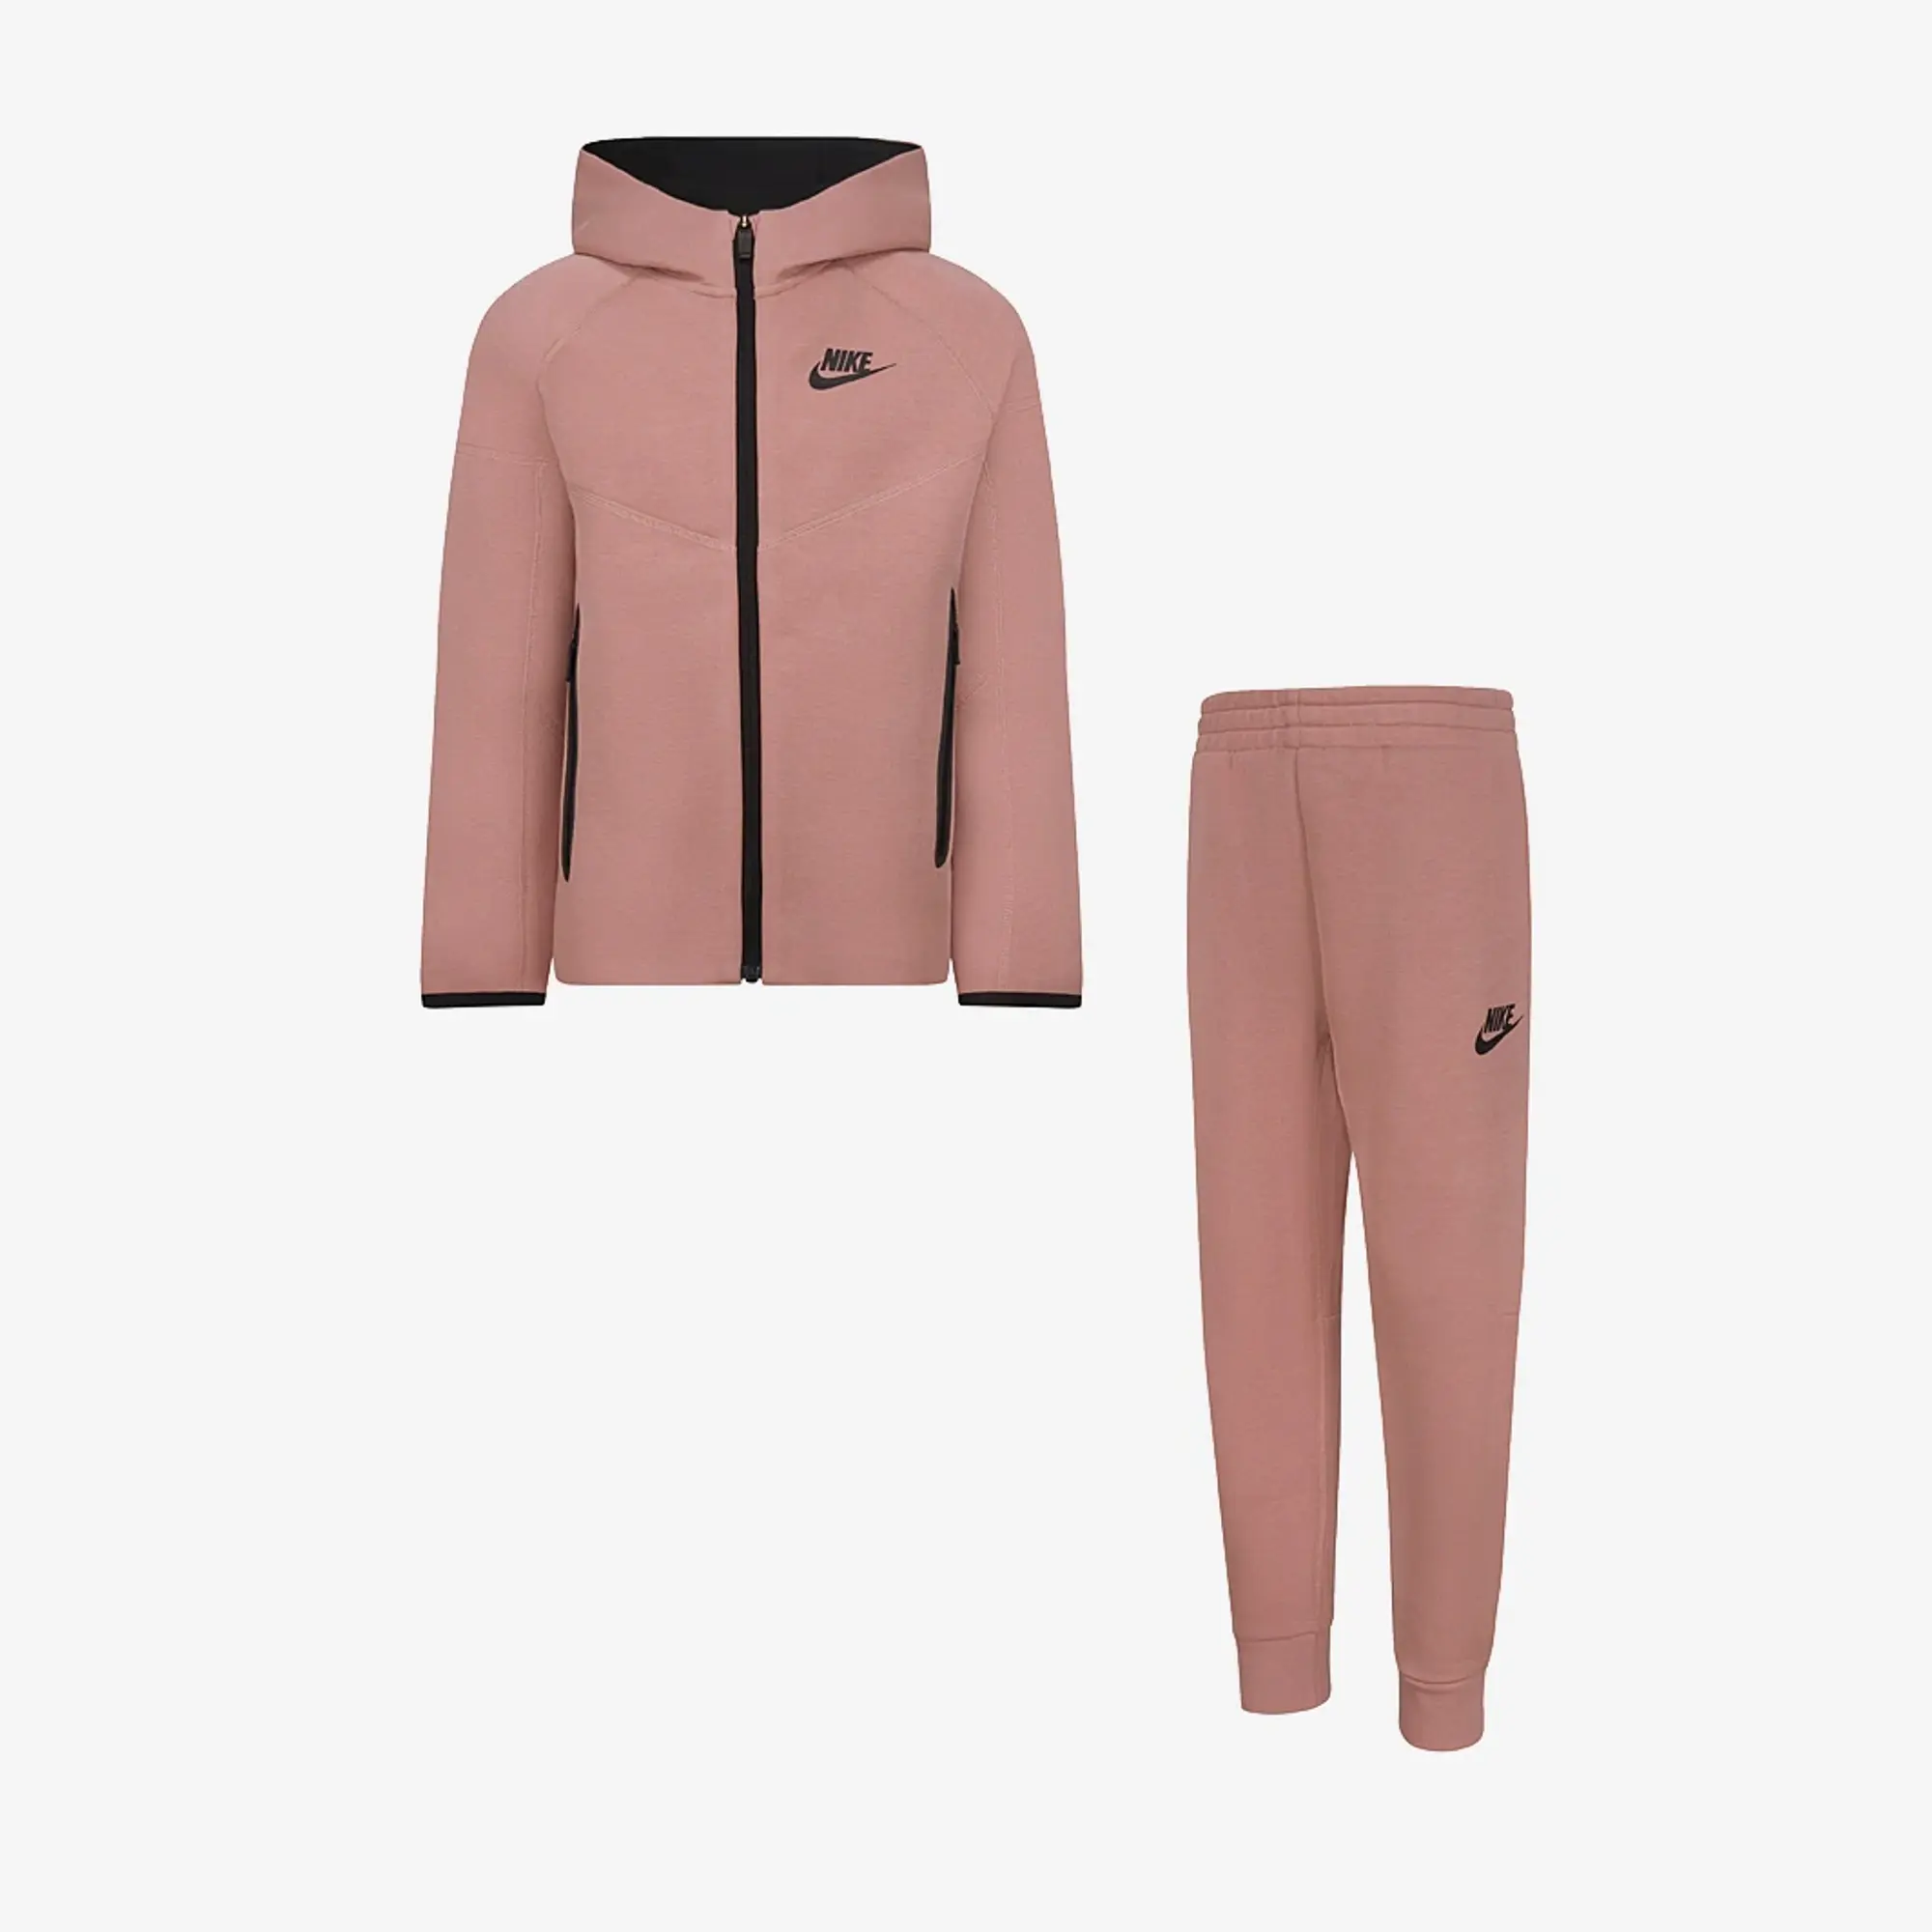 Nike Tch Flc T/Suit In34 - Pink